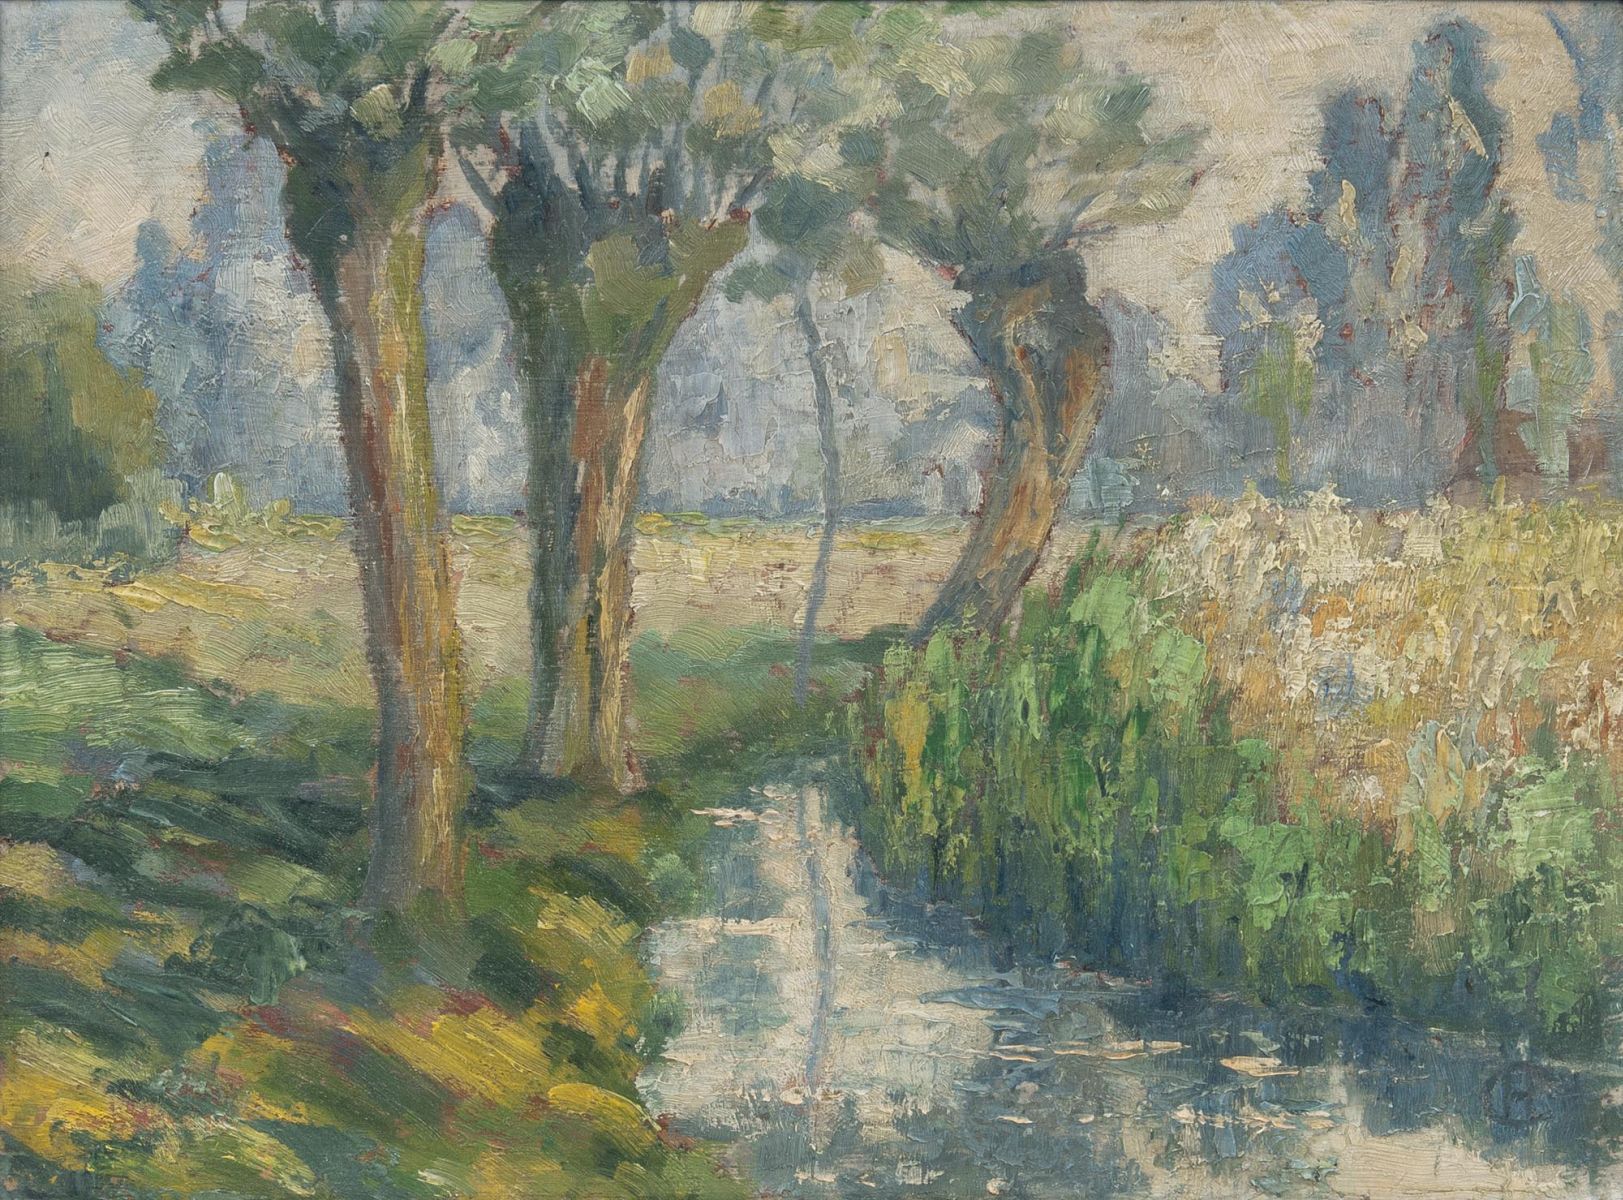 Willows by a Creek